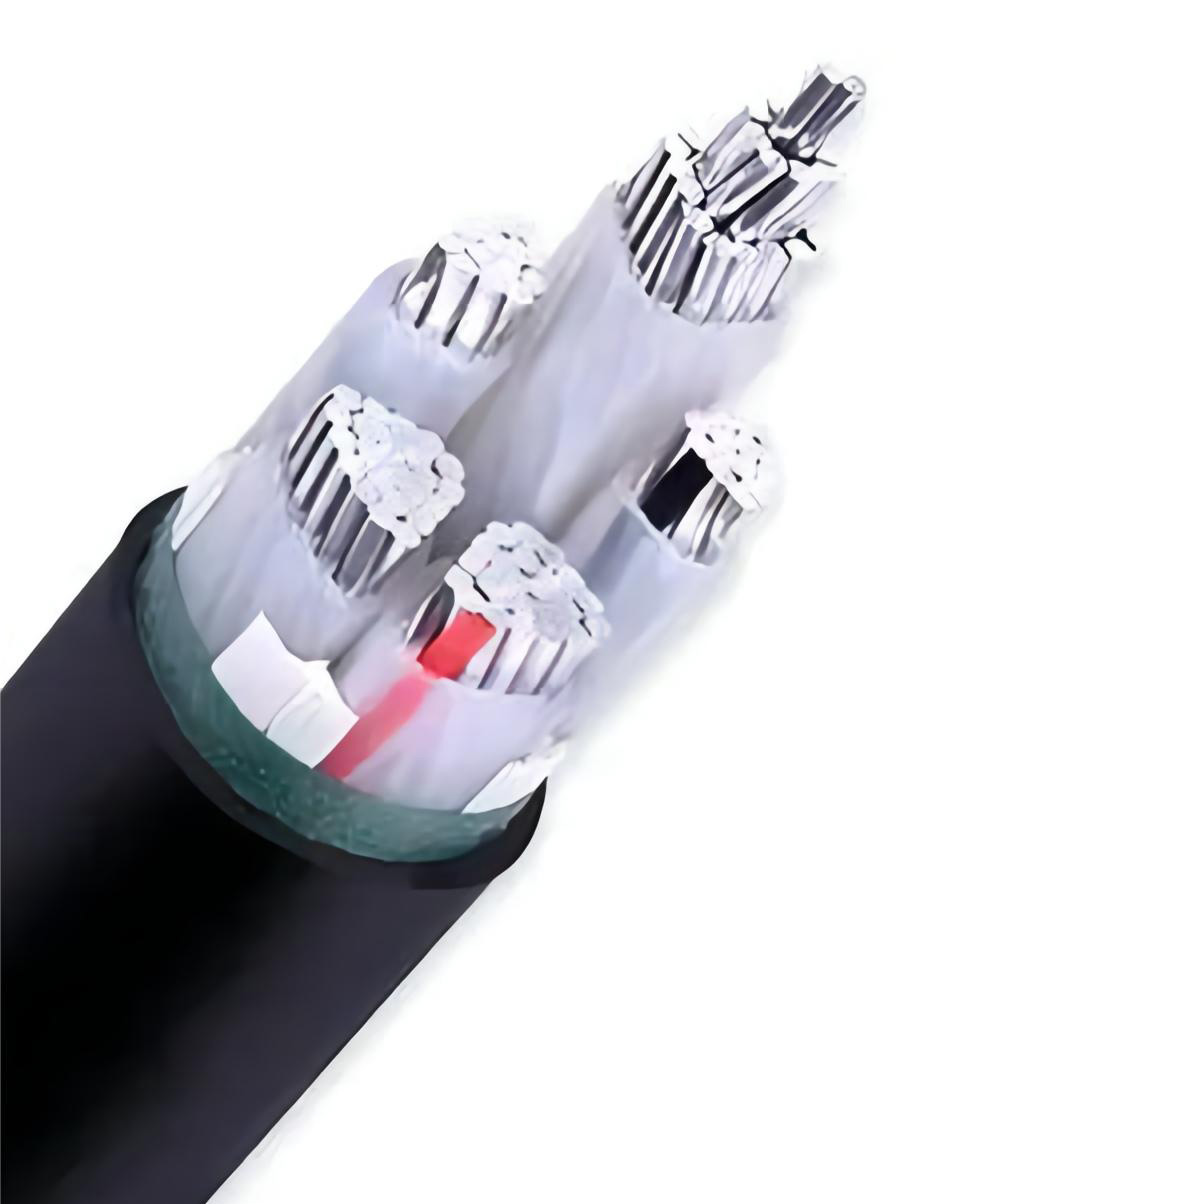 Ubos nga Boltahe XLPE Power Cable Featured Image